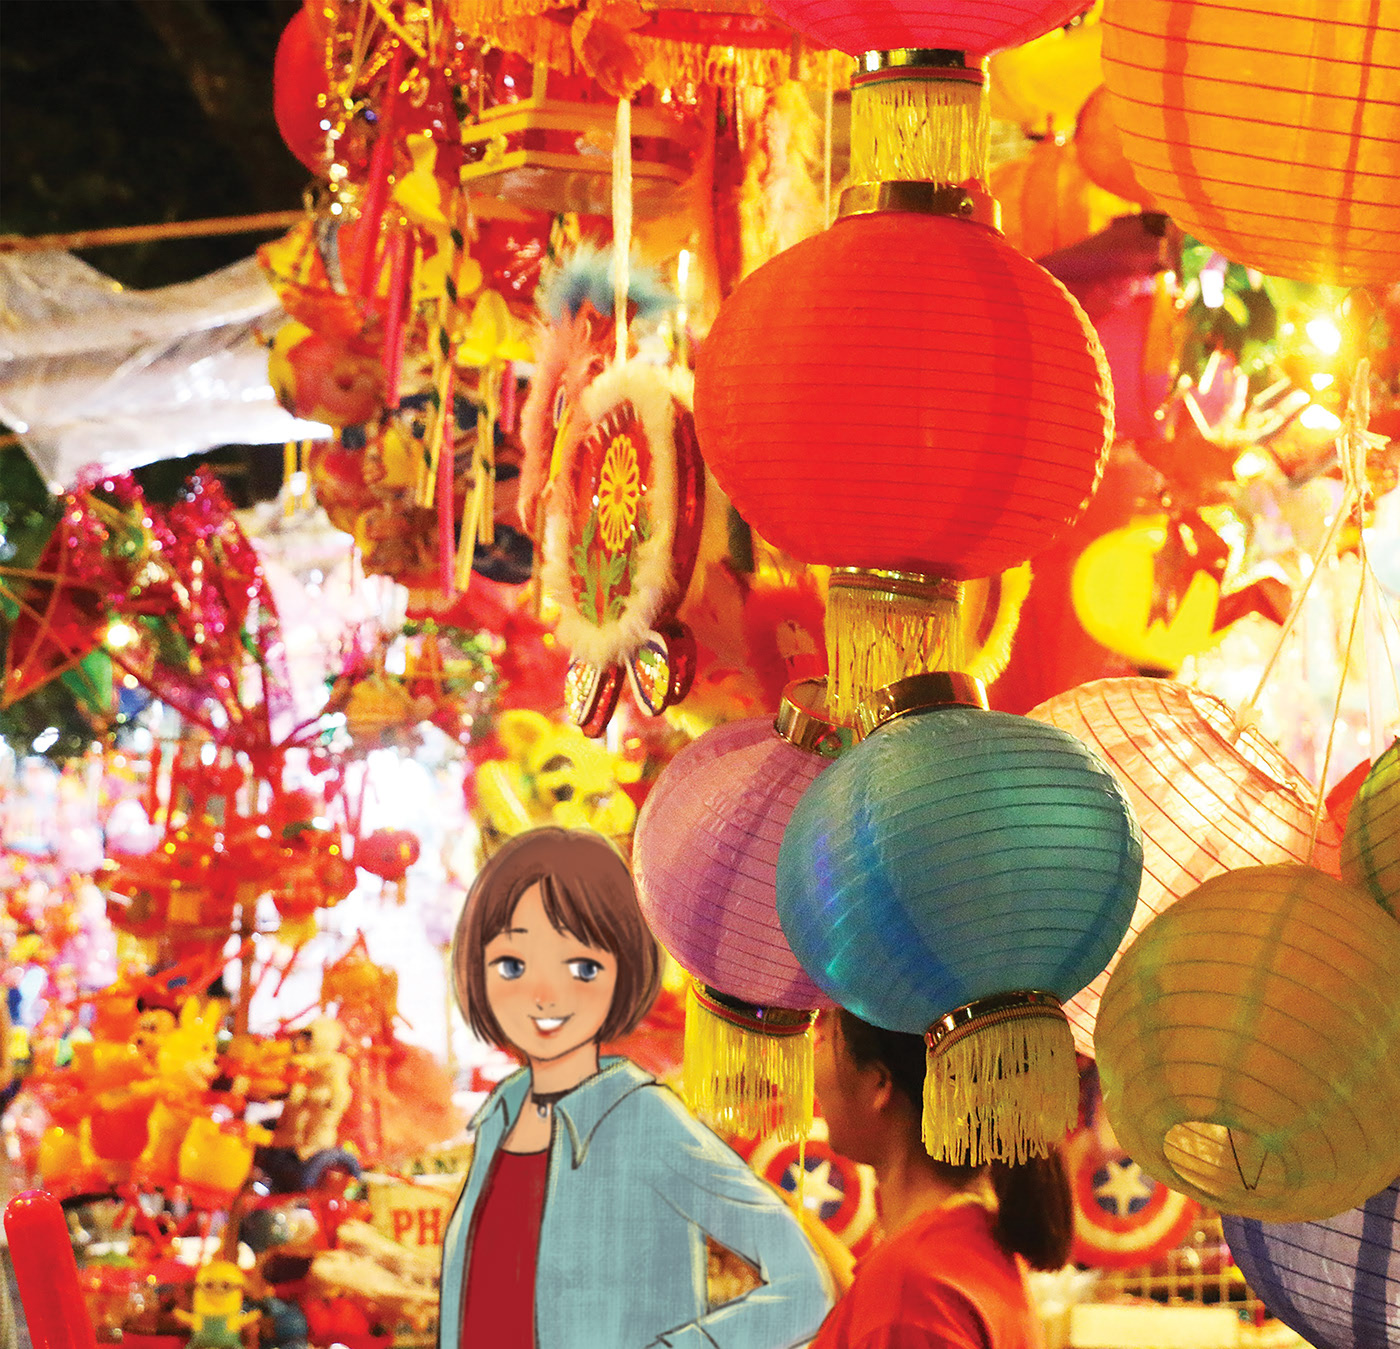 Hang Ma Street in the Mid-Autumn Festival illustration by Cam Giang